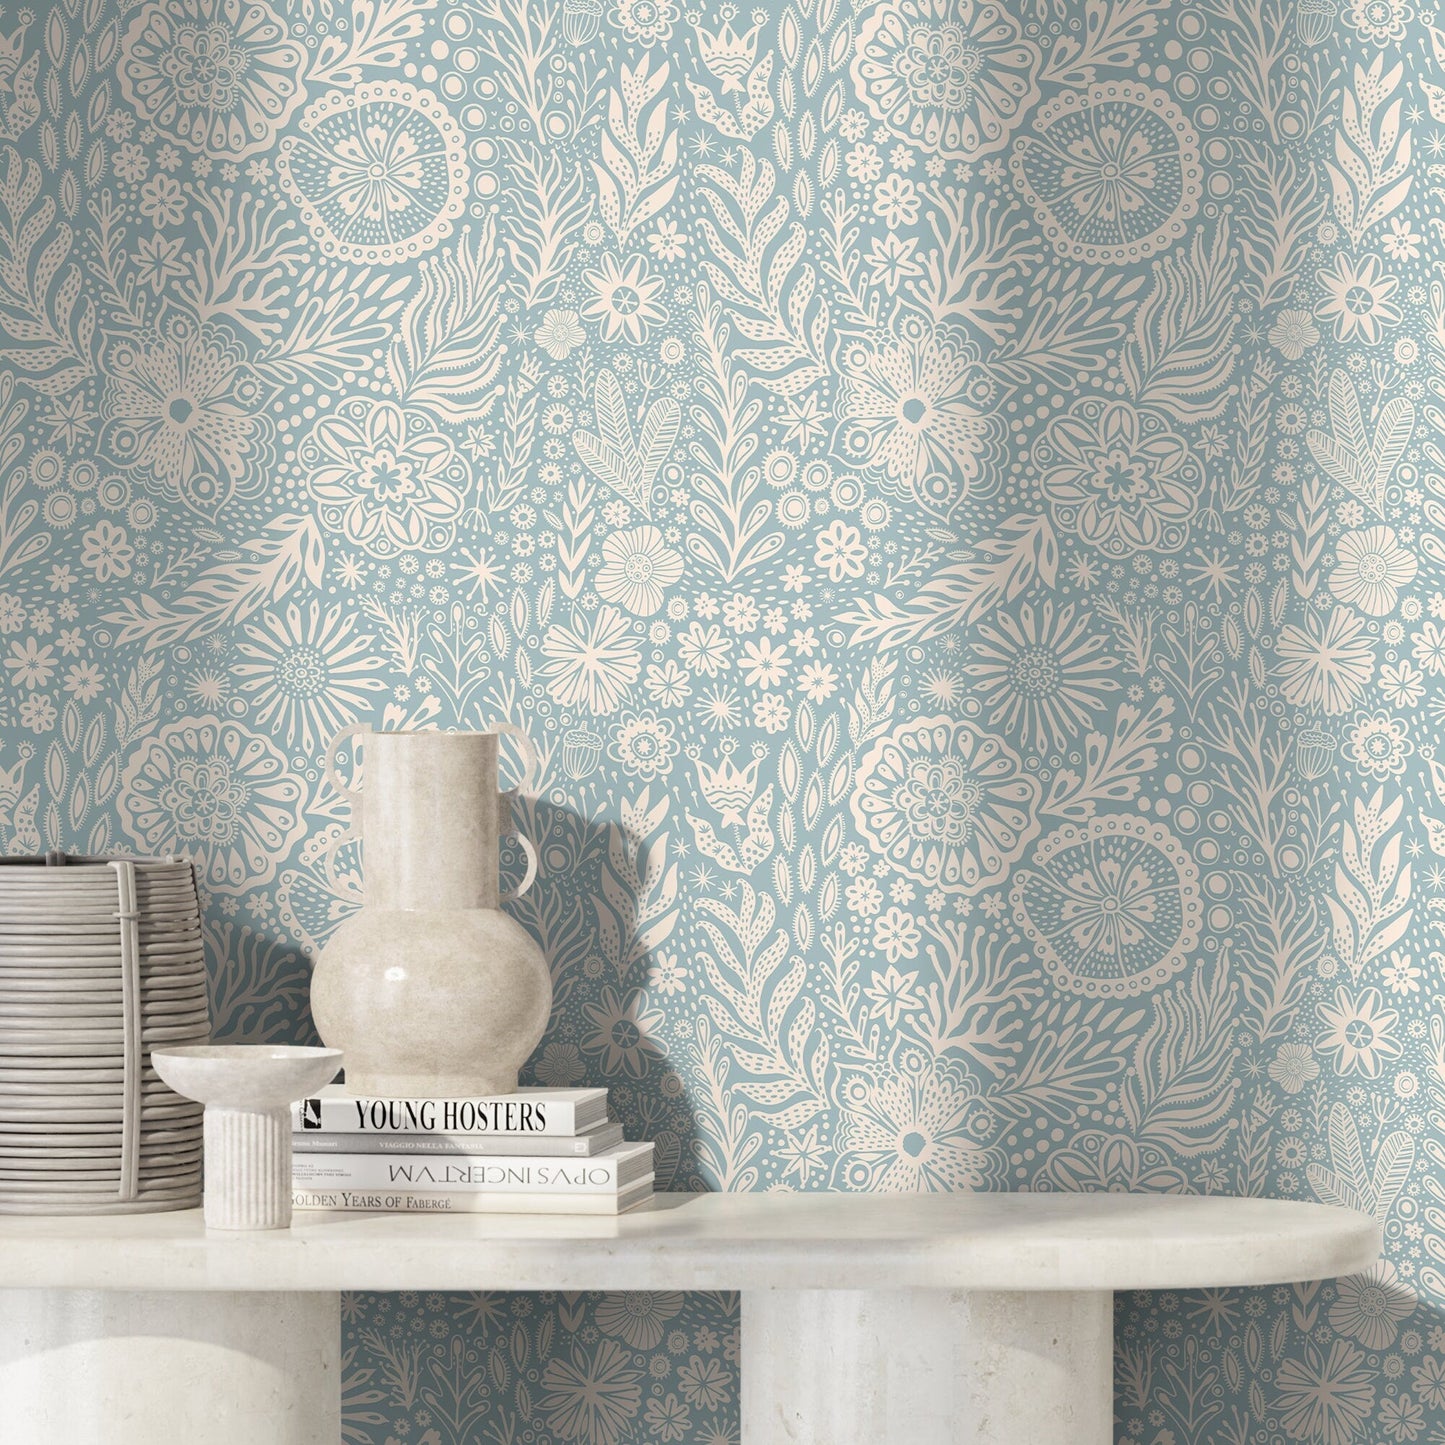 Wallpaper Peel and Stick Wallpaper Removable Wallpaper Home Decor Wall Art Wall Decor Room Decor / Floral Blue Wallpaper - C435